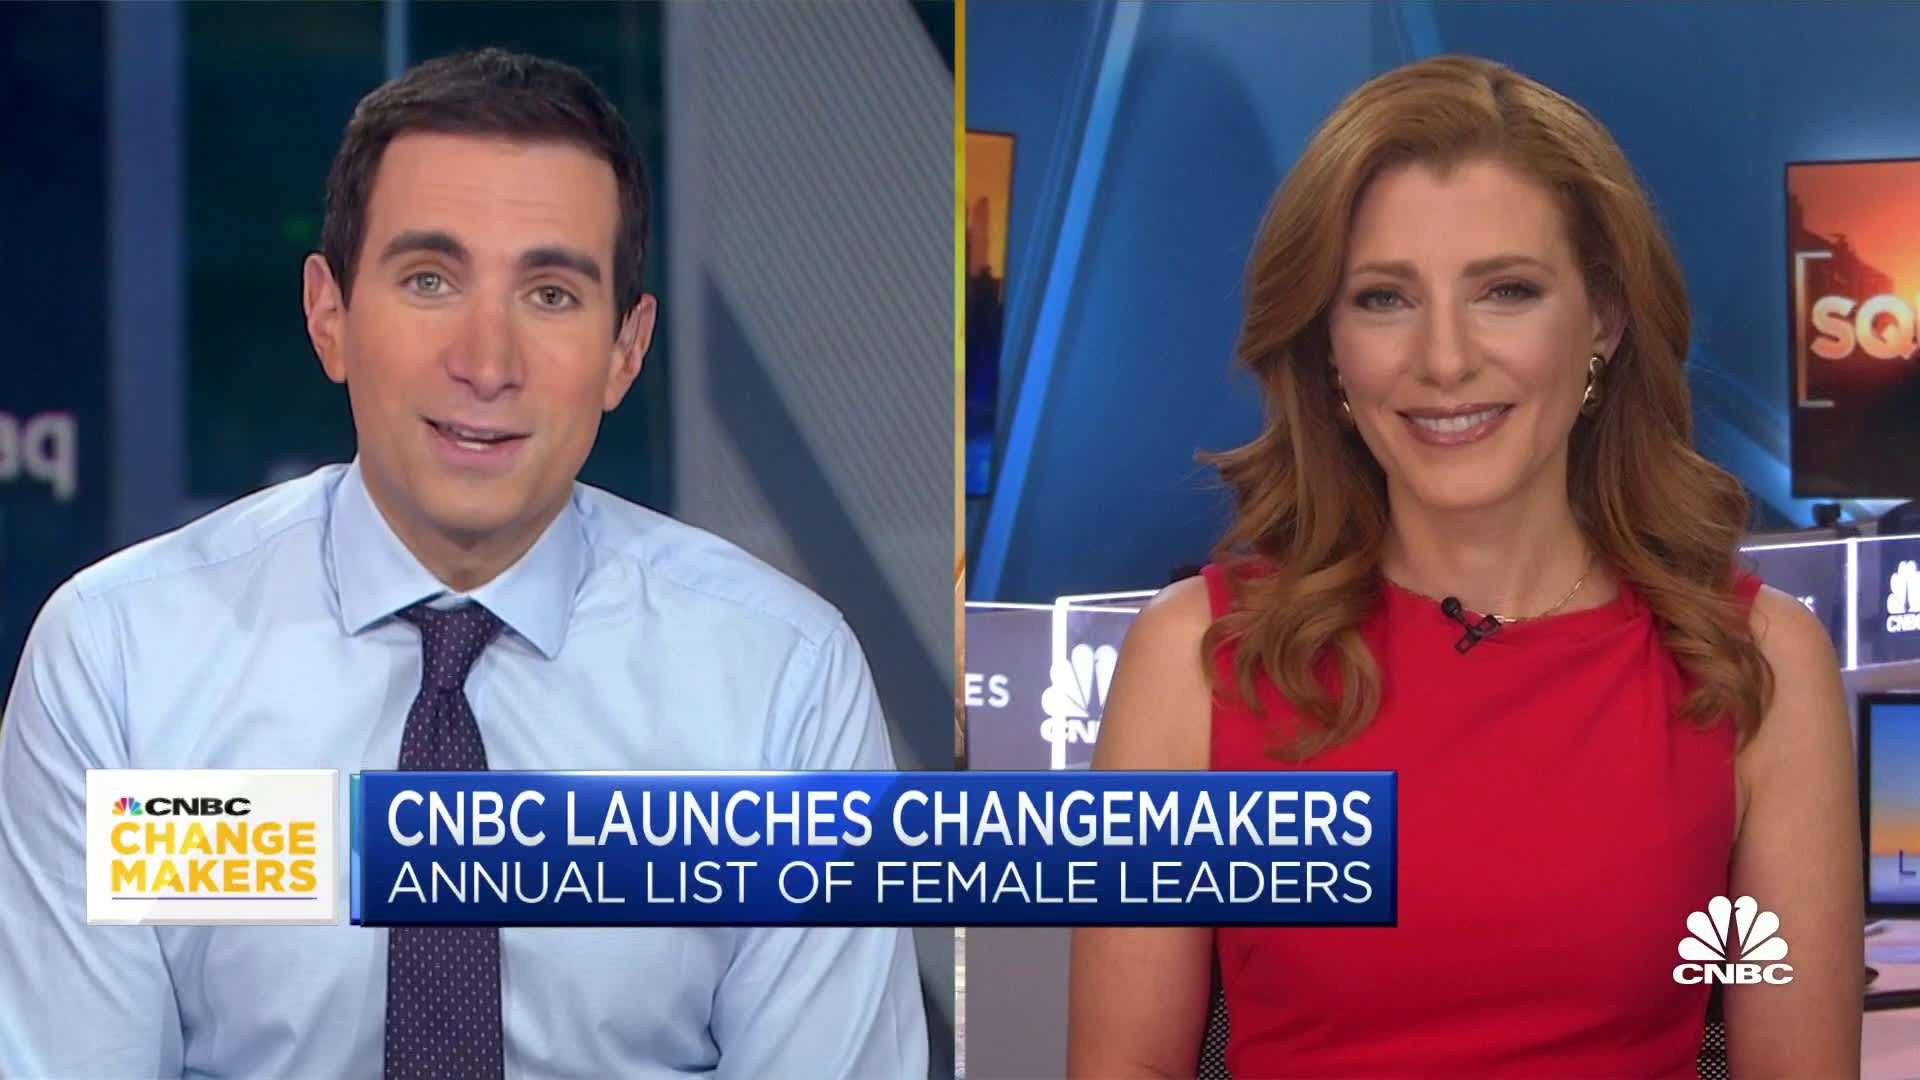 CNBC launches Changemakers: Annual list of female leaders